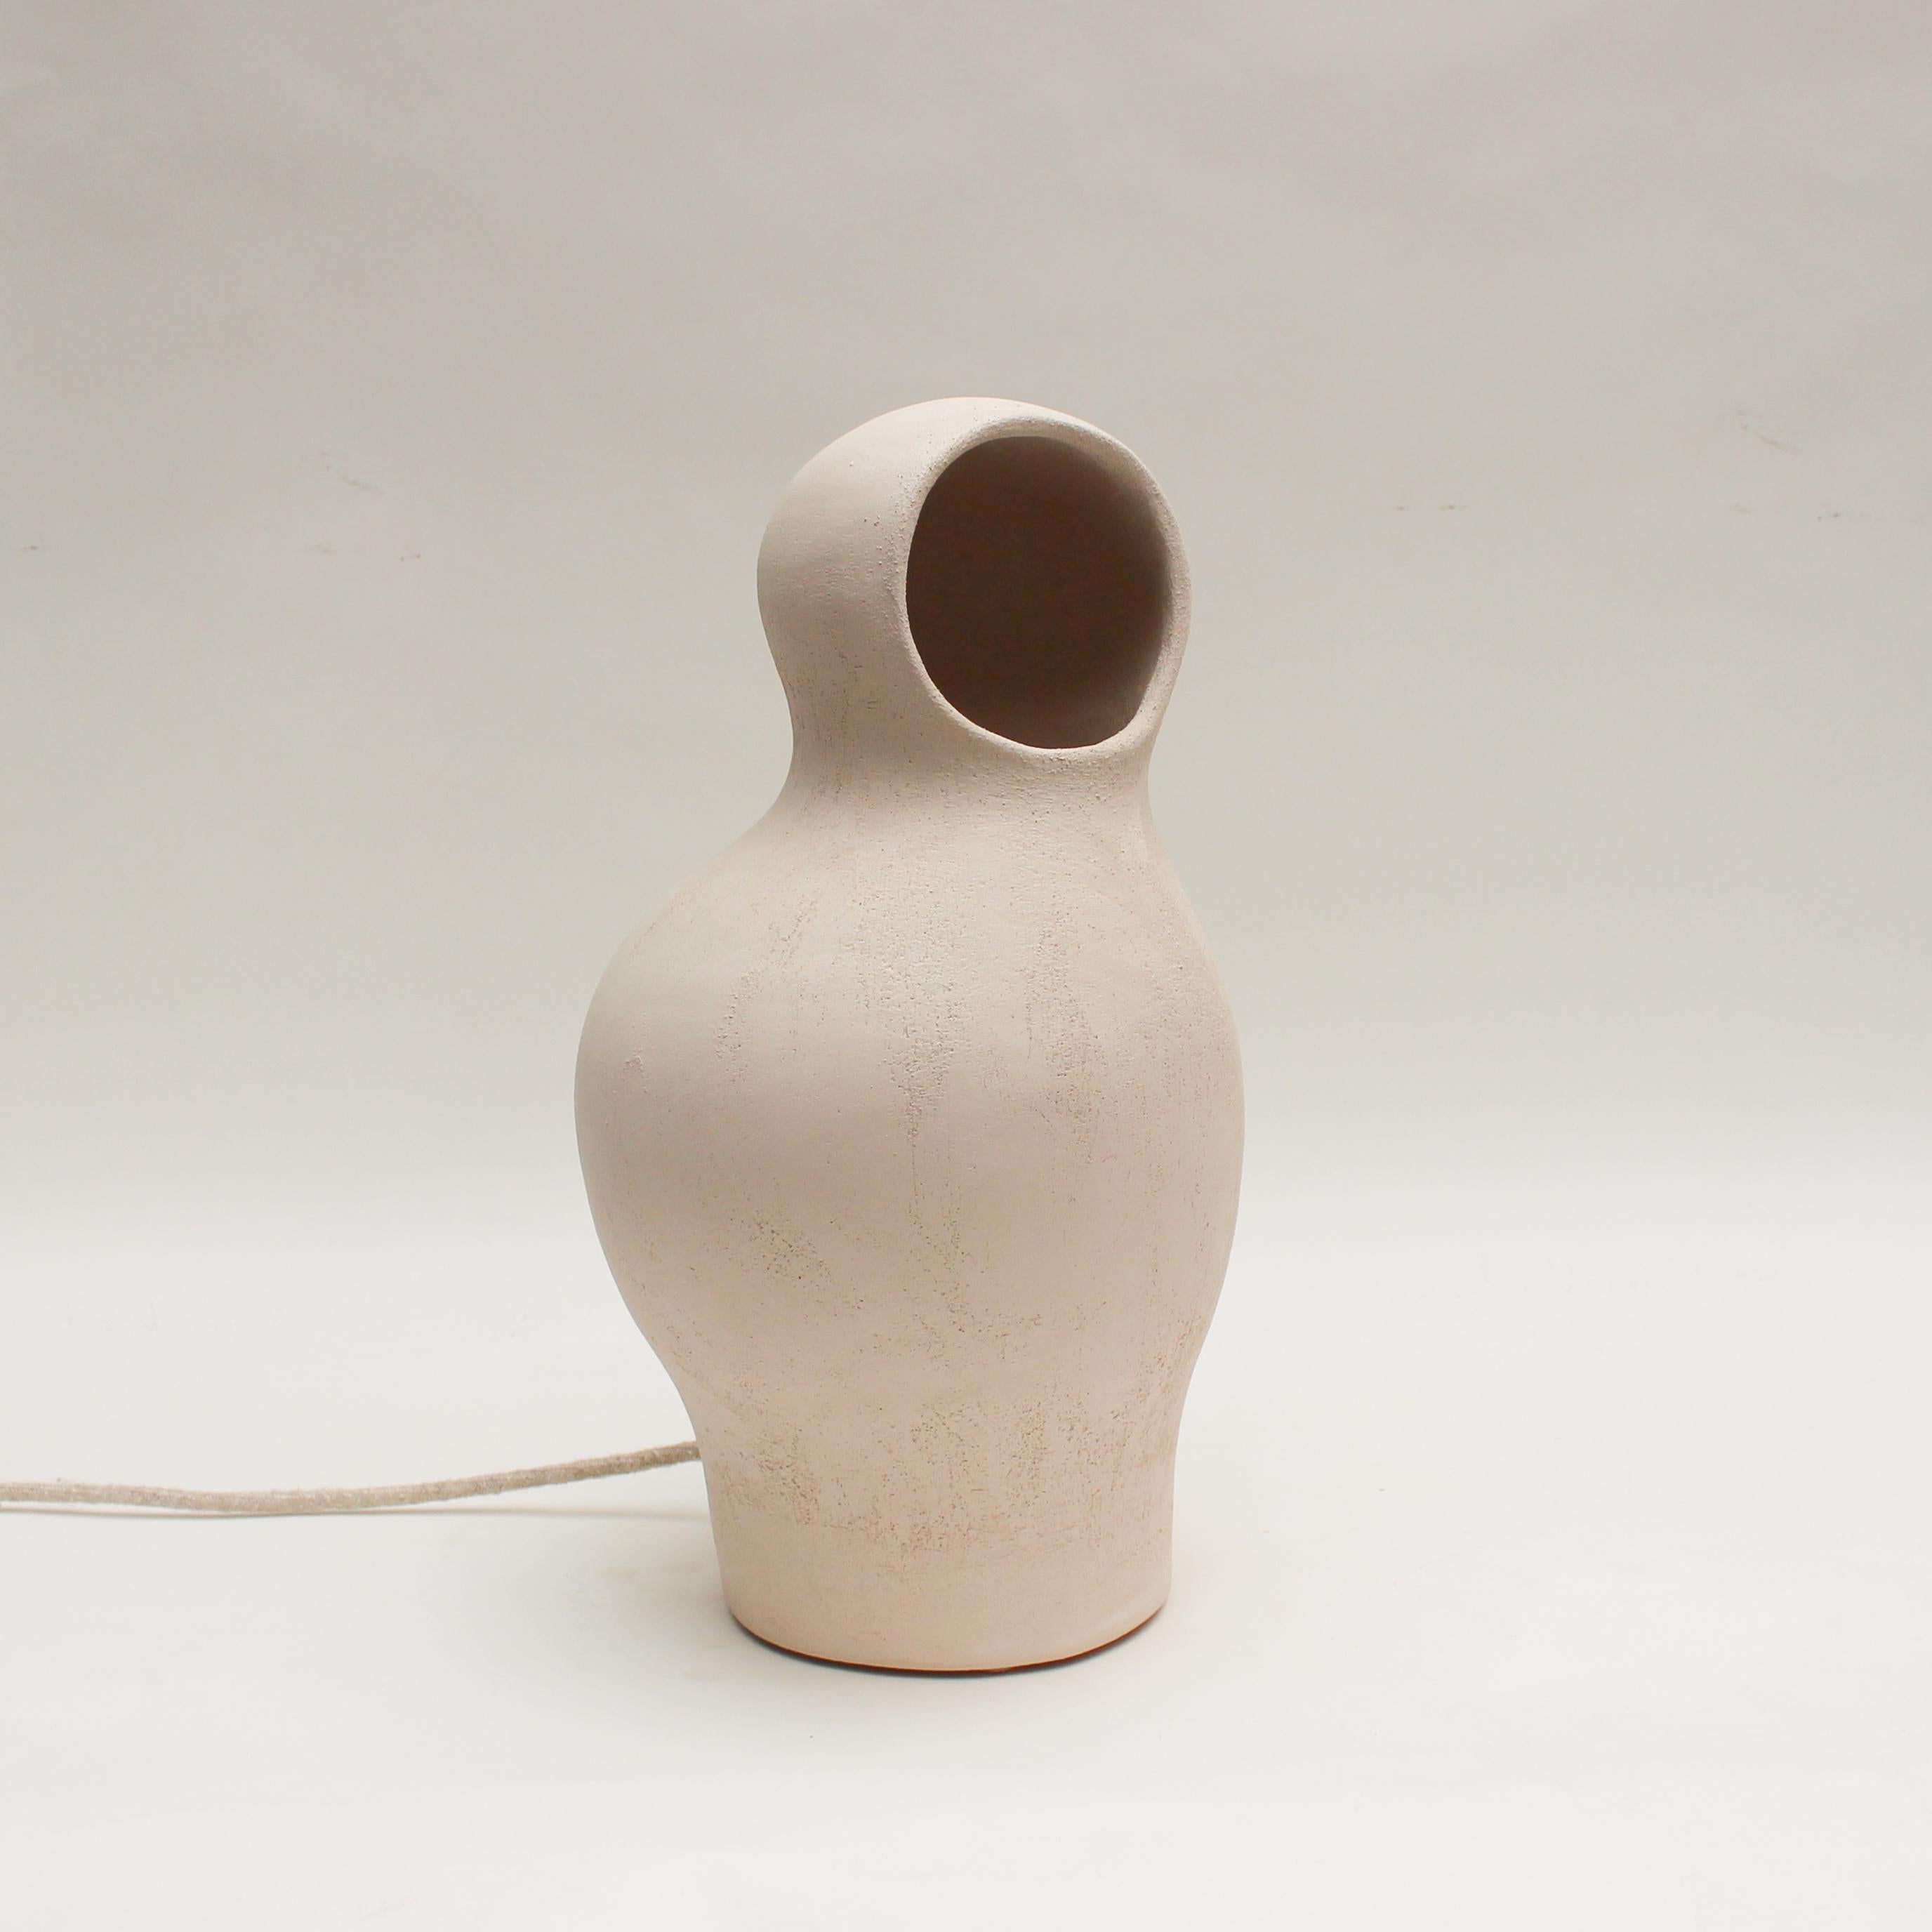 Cocon #3 white stoneware by Elisa Uberti.
Dimensions: high around 35 cm.
Materials: white stoneware.

After fifteen years in fashion, Elisa Uberti decides to take the time to work with these hands and to give birth to new projects.

Designer